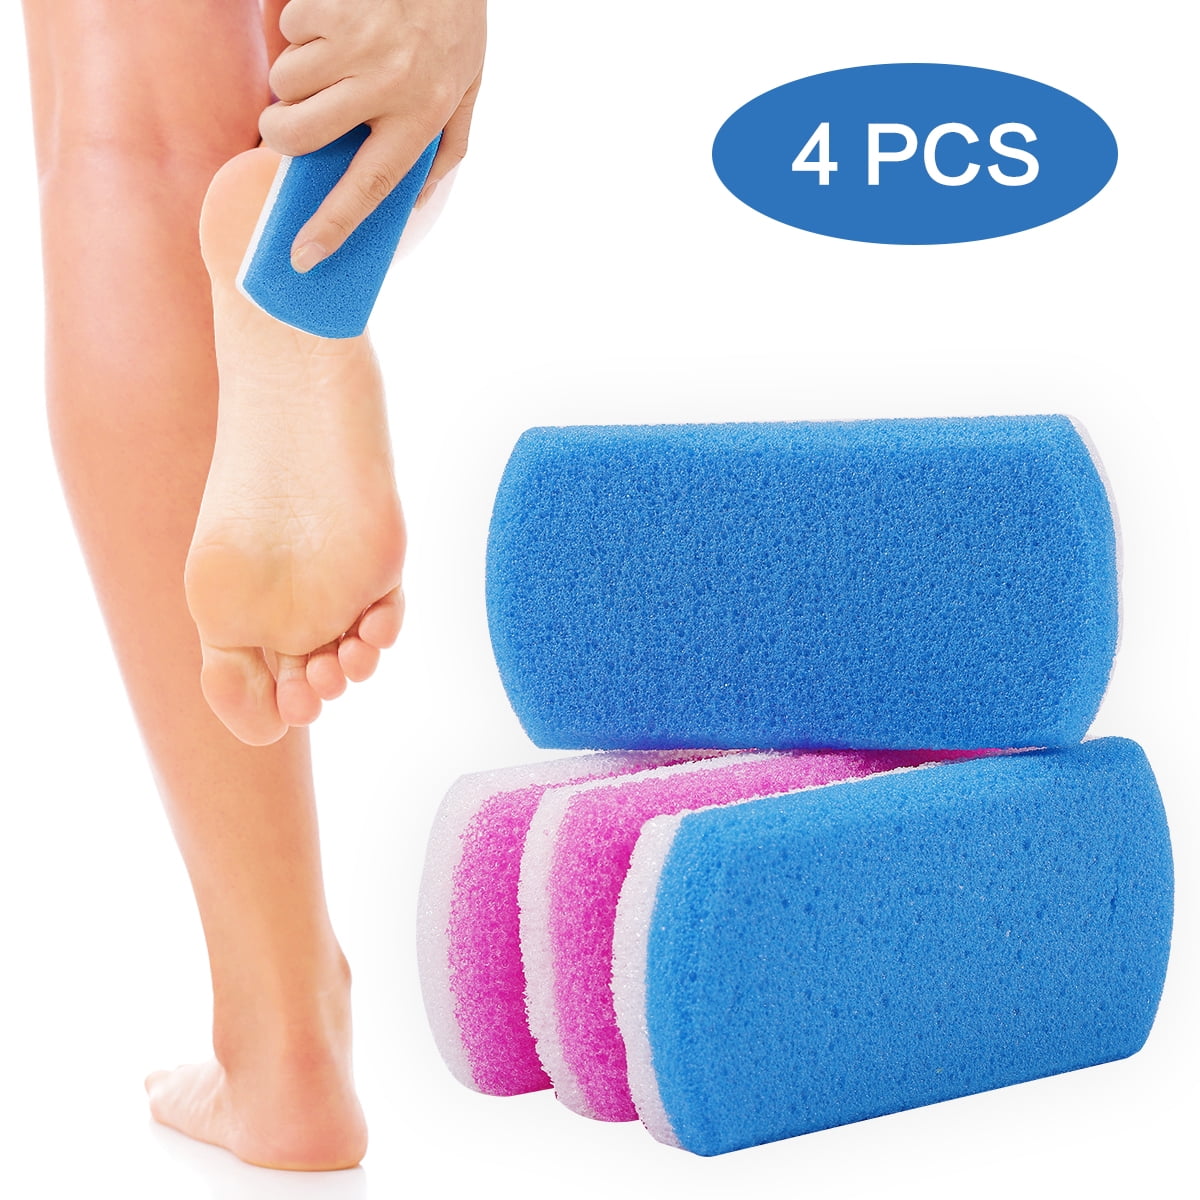 Foot Pumice Stone for Feet Hard Skin Callus Remover and Scrubber for sale online pack of 4 